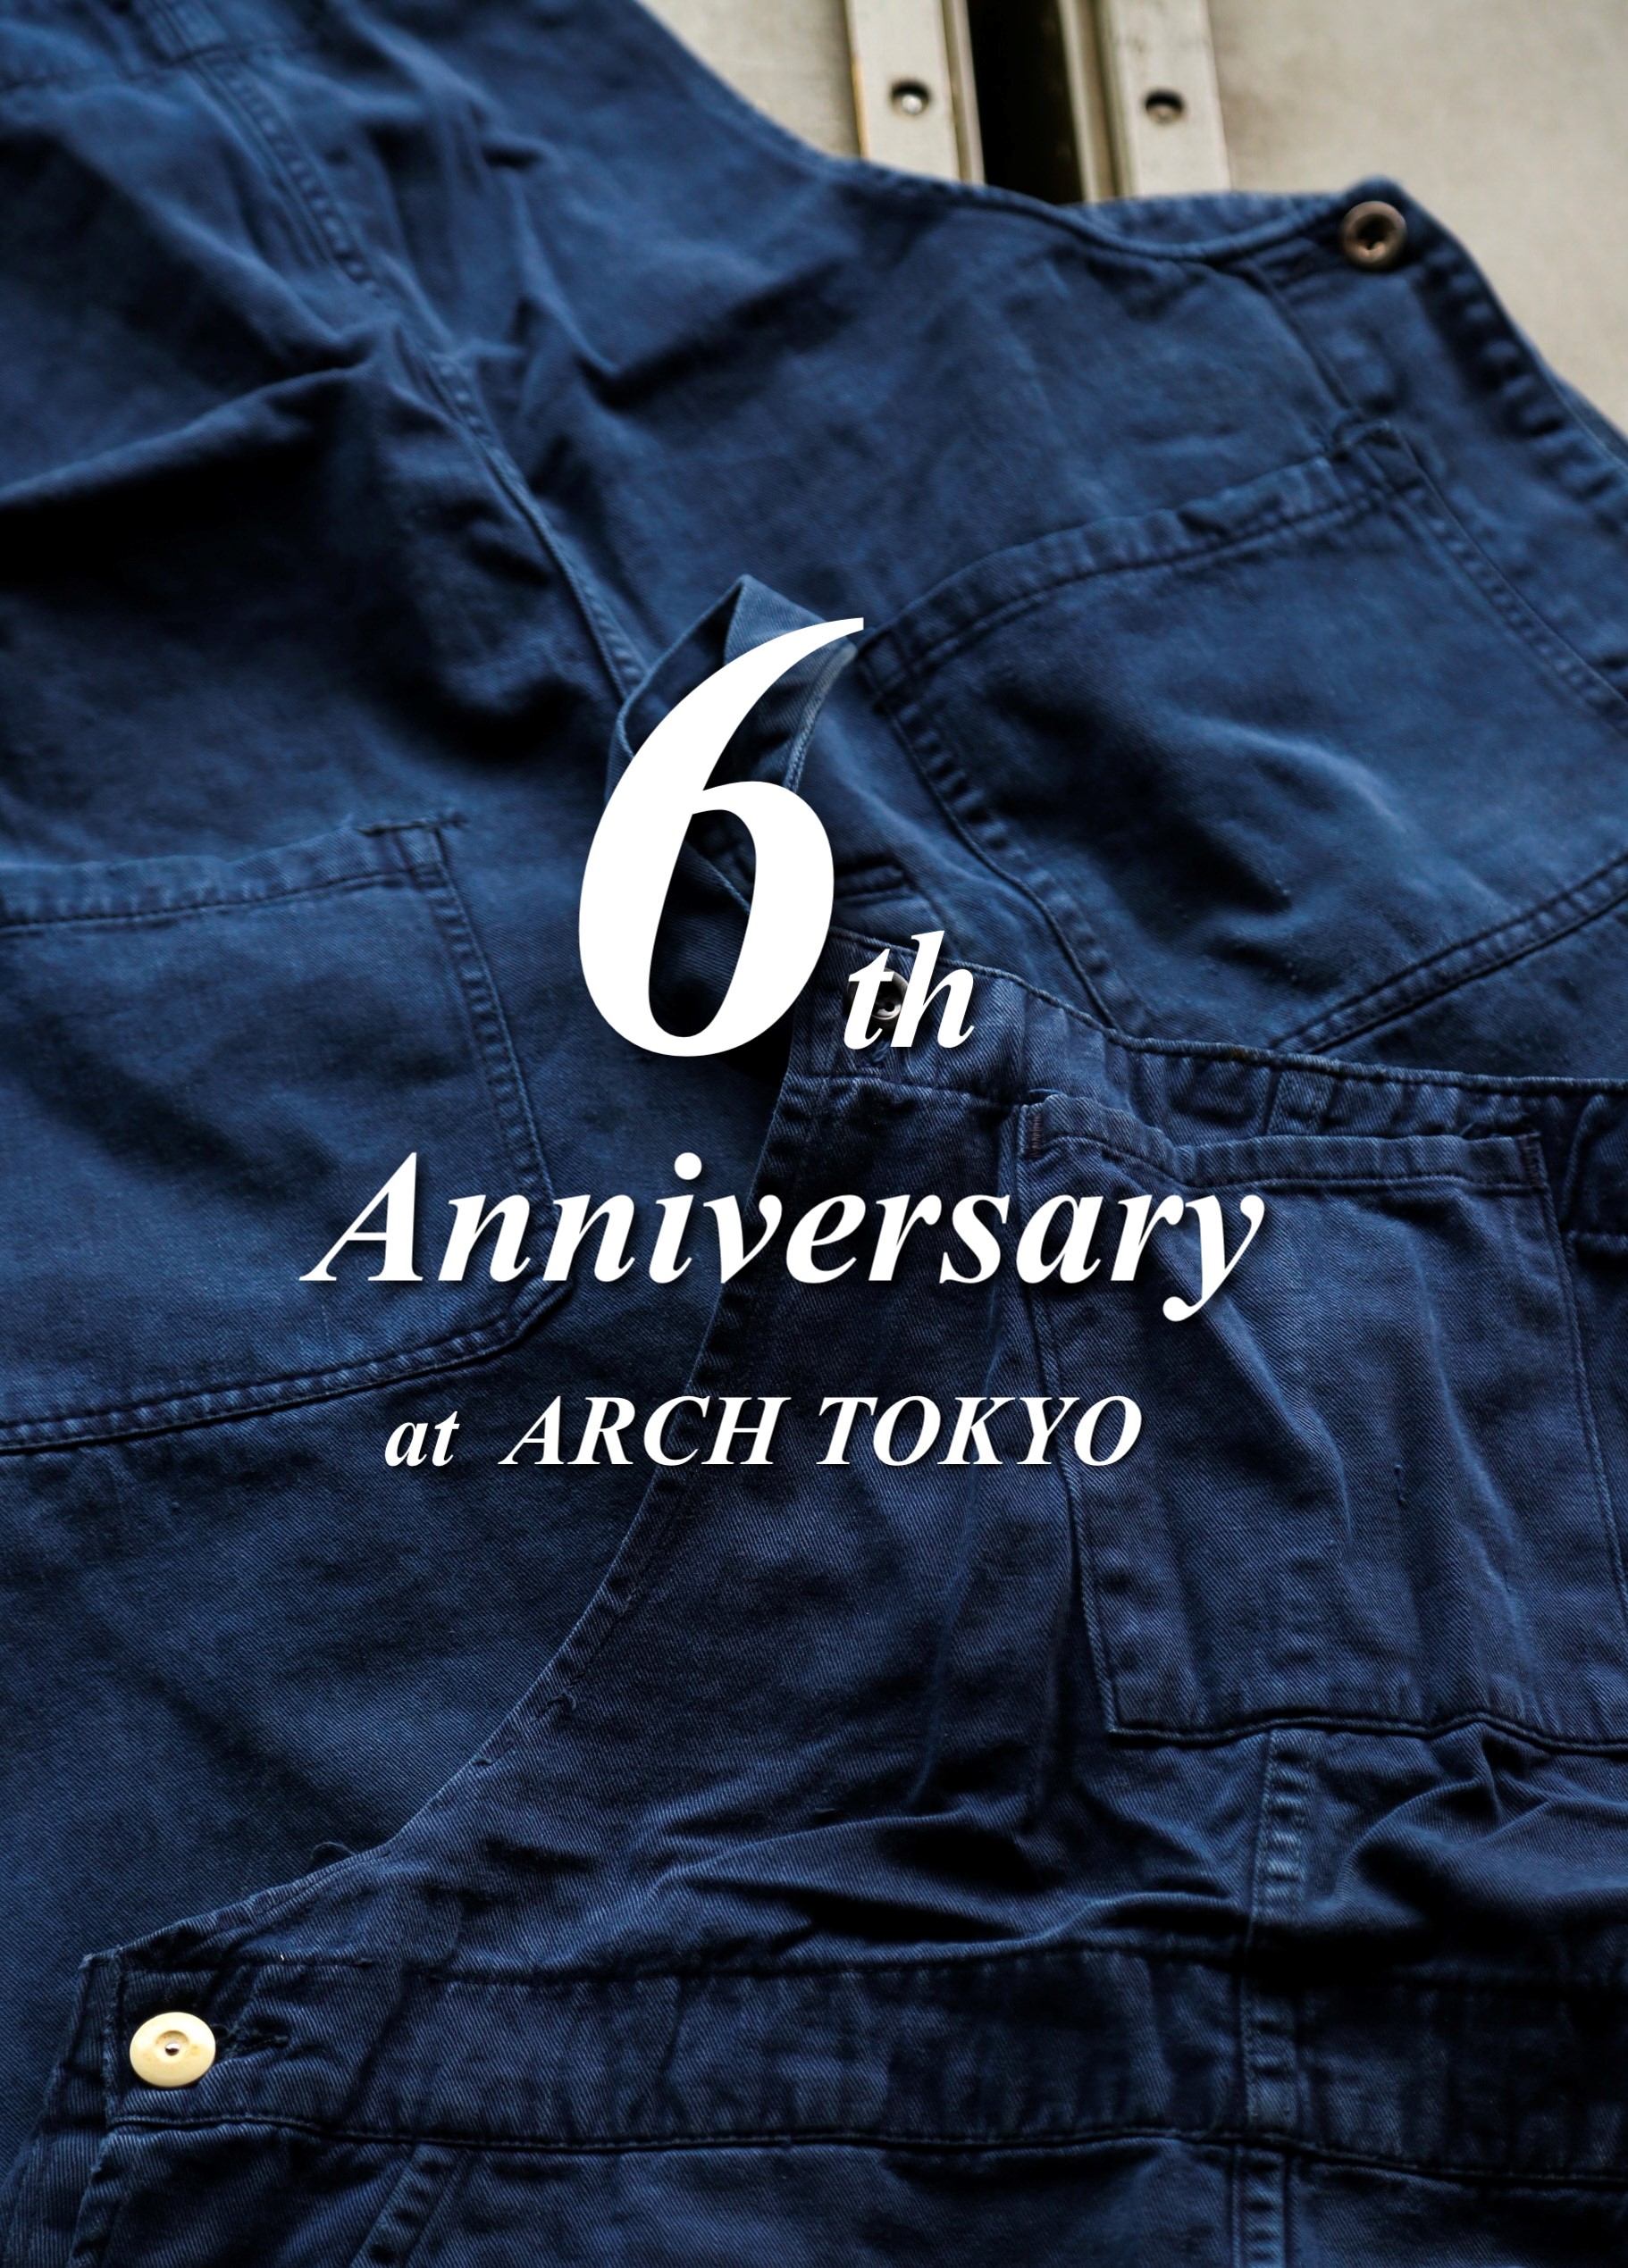 6th Anniversary Item② “SPECIAL DYED BRITISH VINTAGE OVERALL 